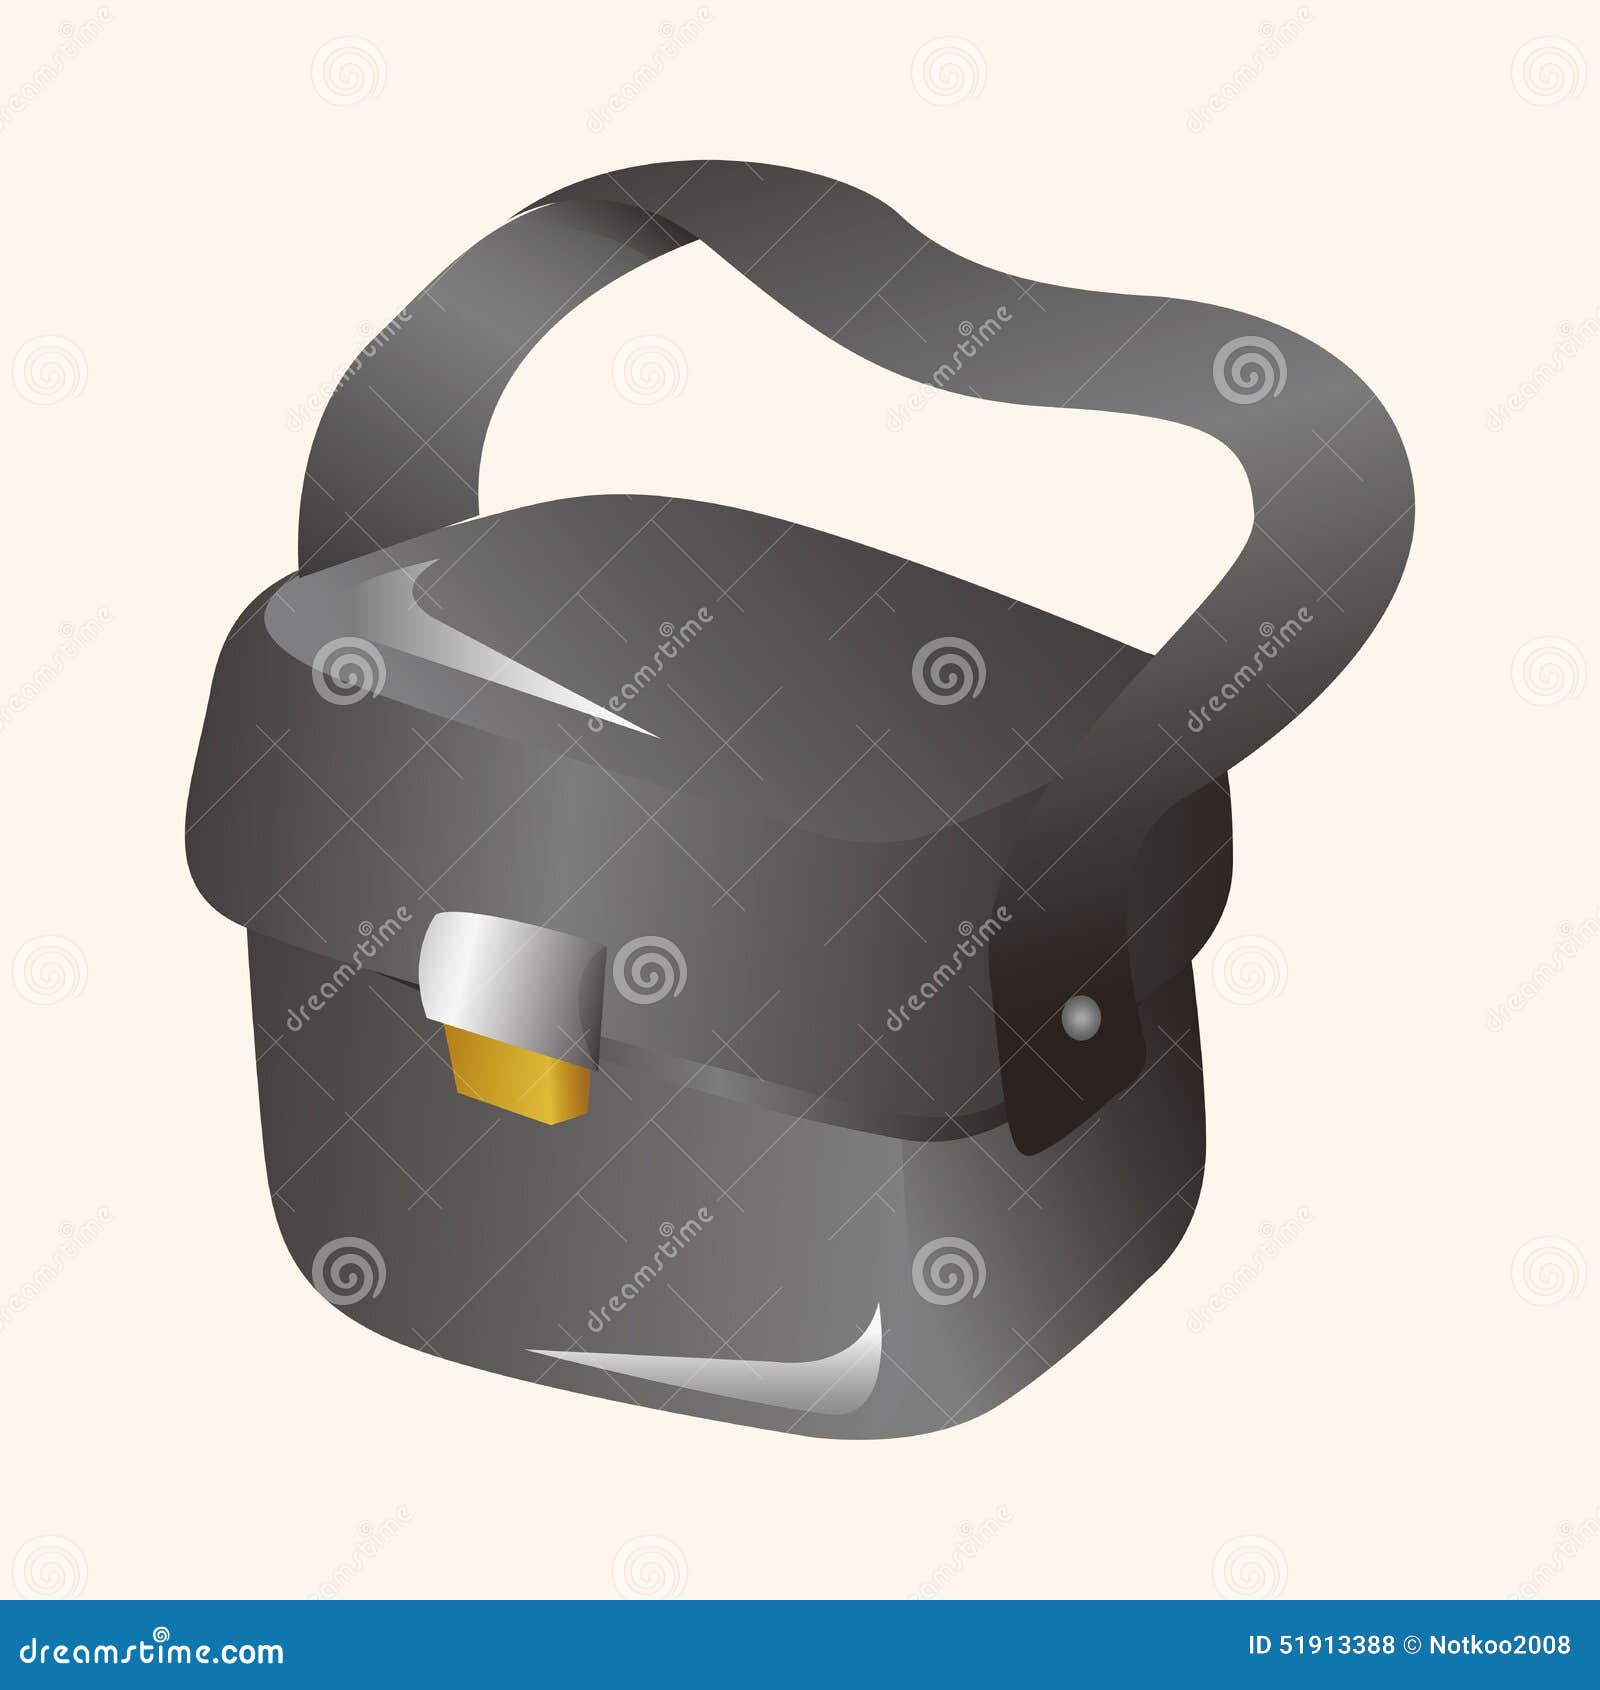 Camera bag theme elements stock vector. Illustration of silhouette ...